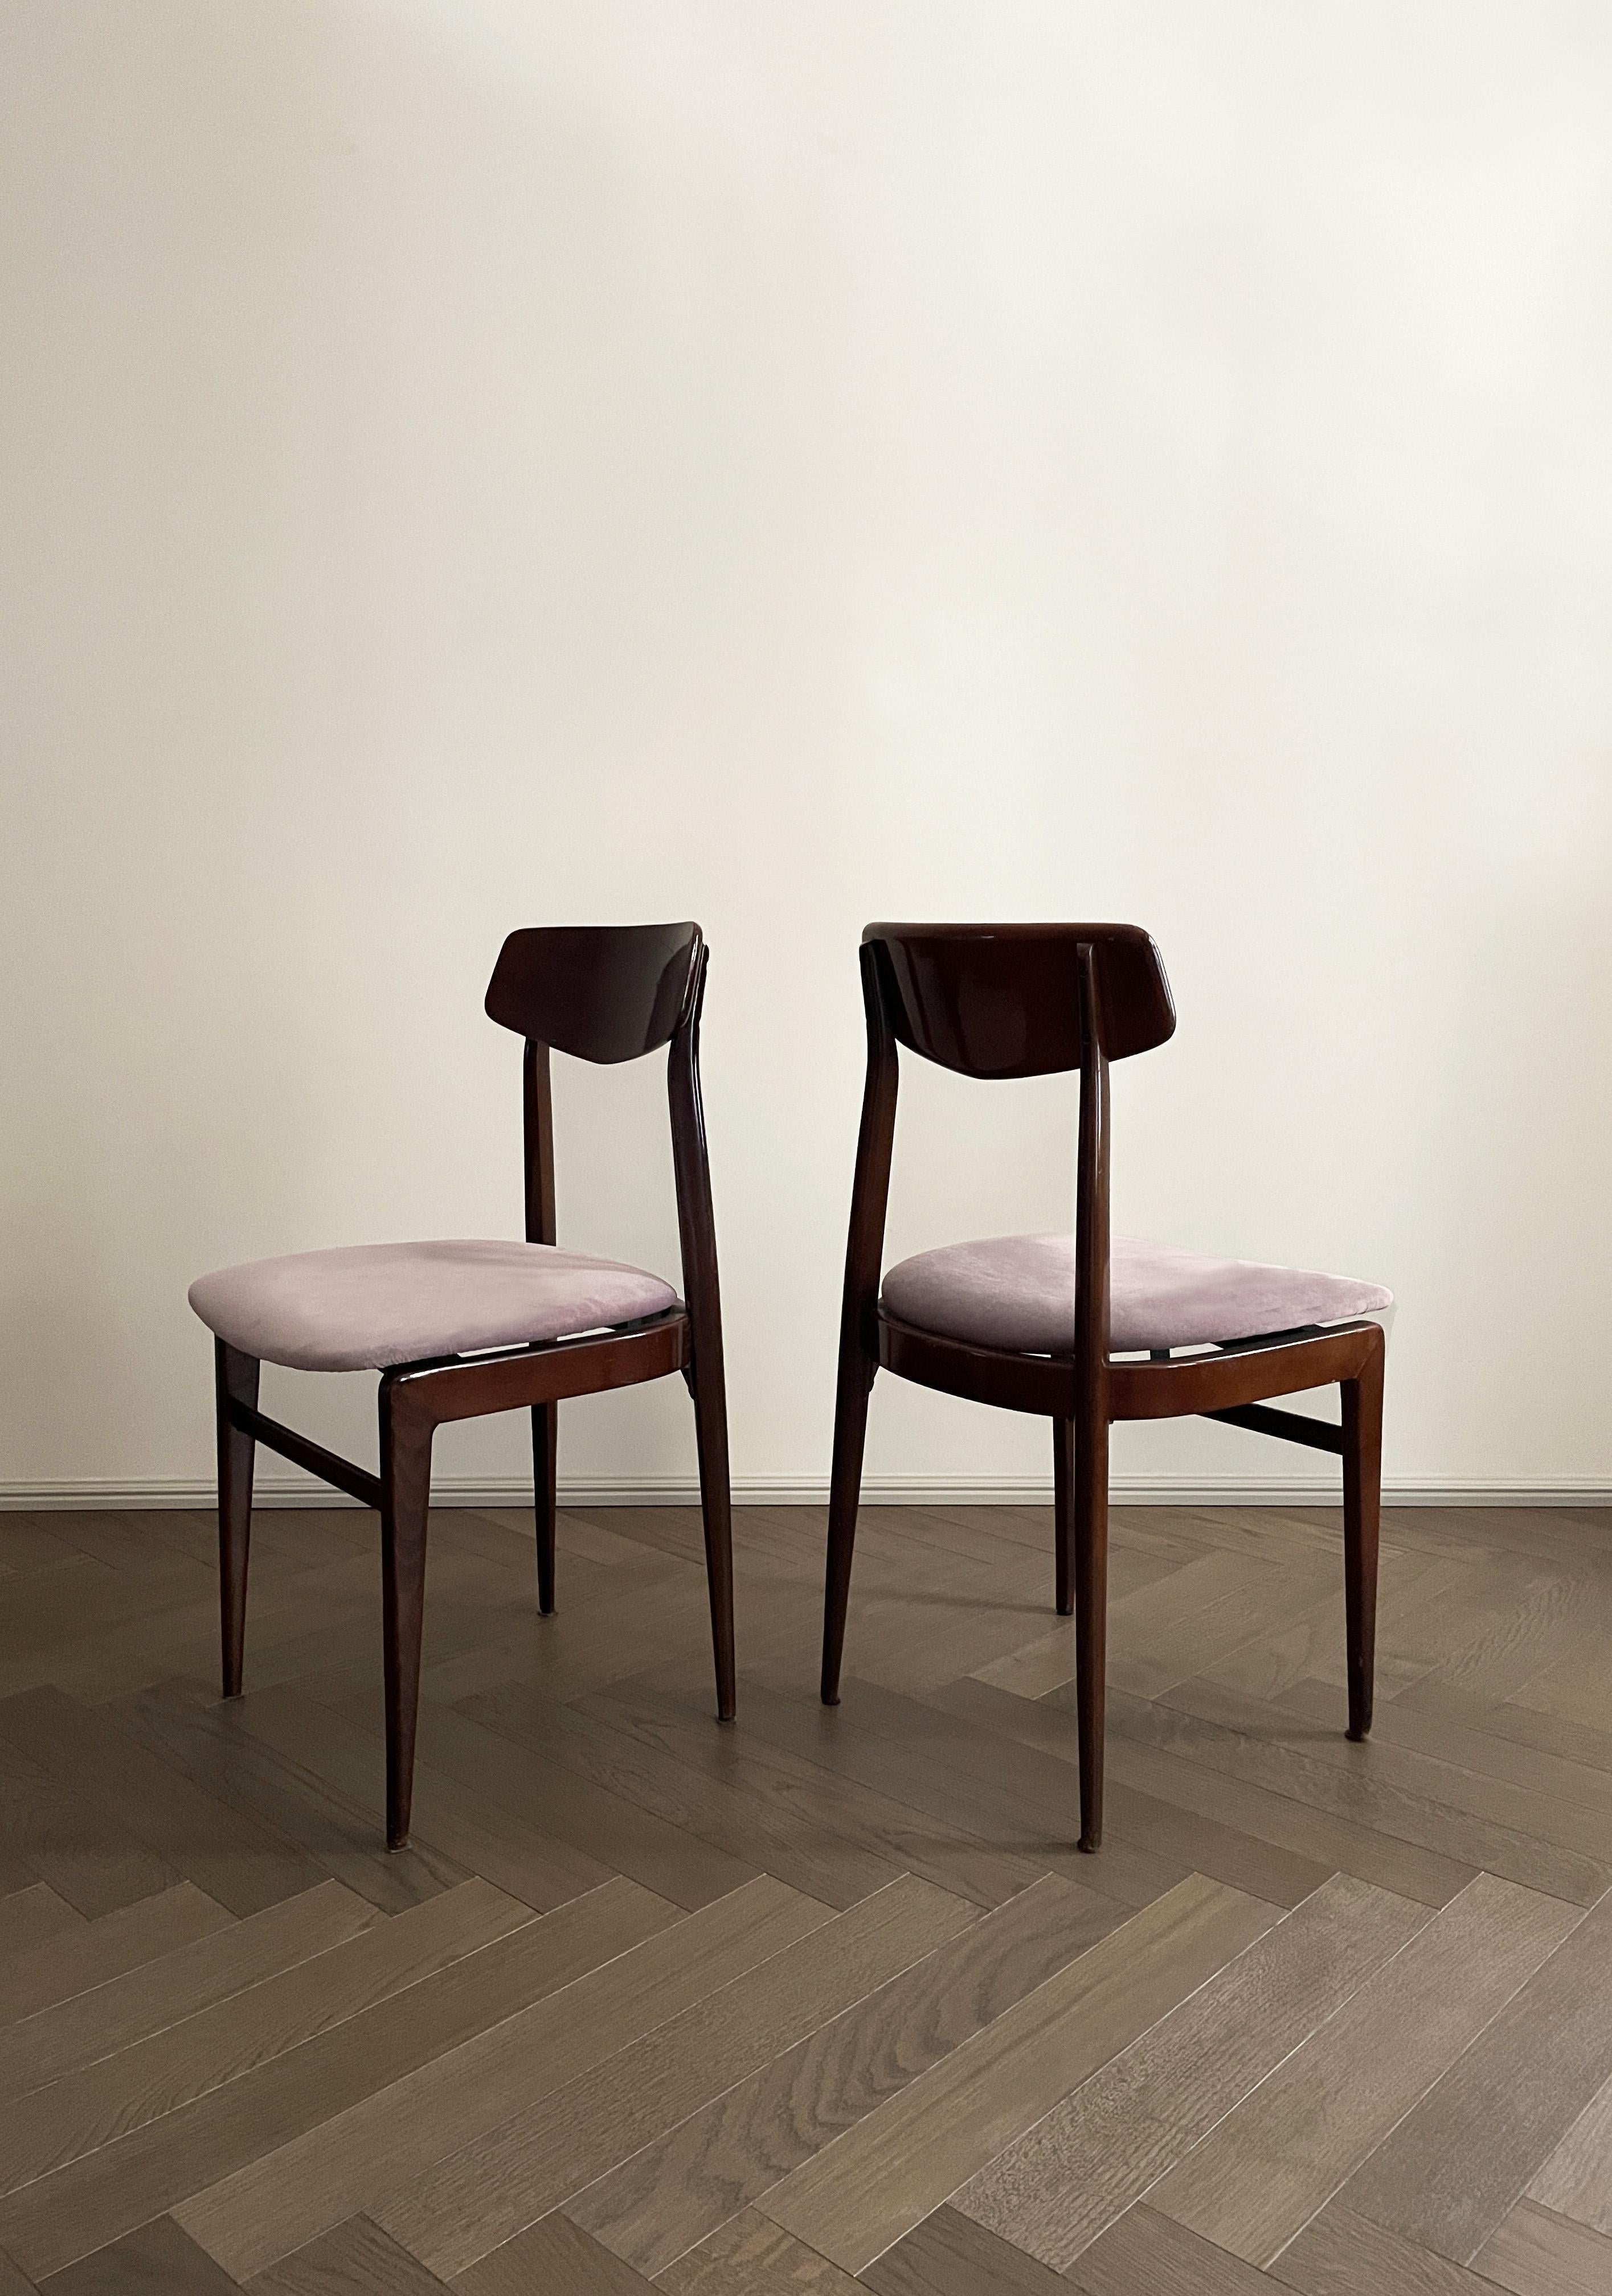 Set of 2 Teak Dining Chairs with Velvet Seat, Scandinavian Design, 1960s In Good Condition For Sale In Milano, IT